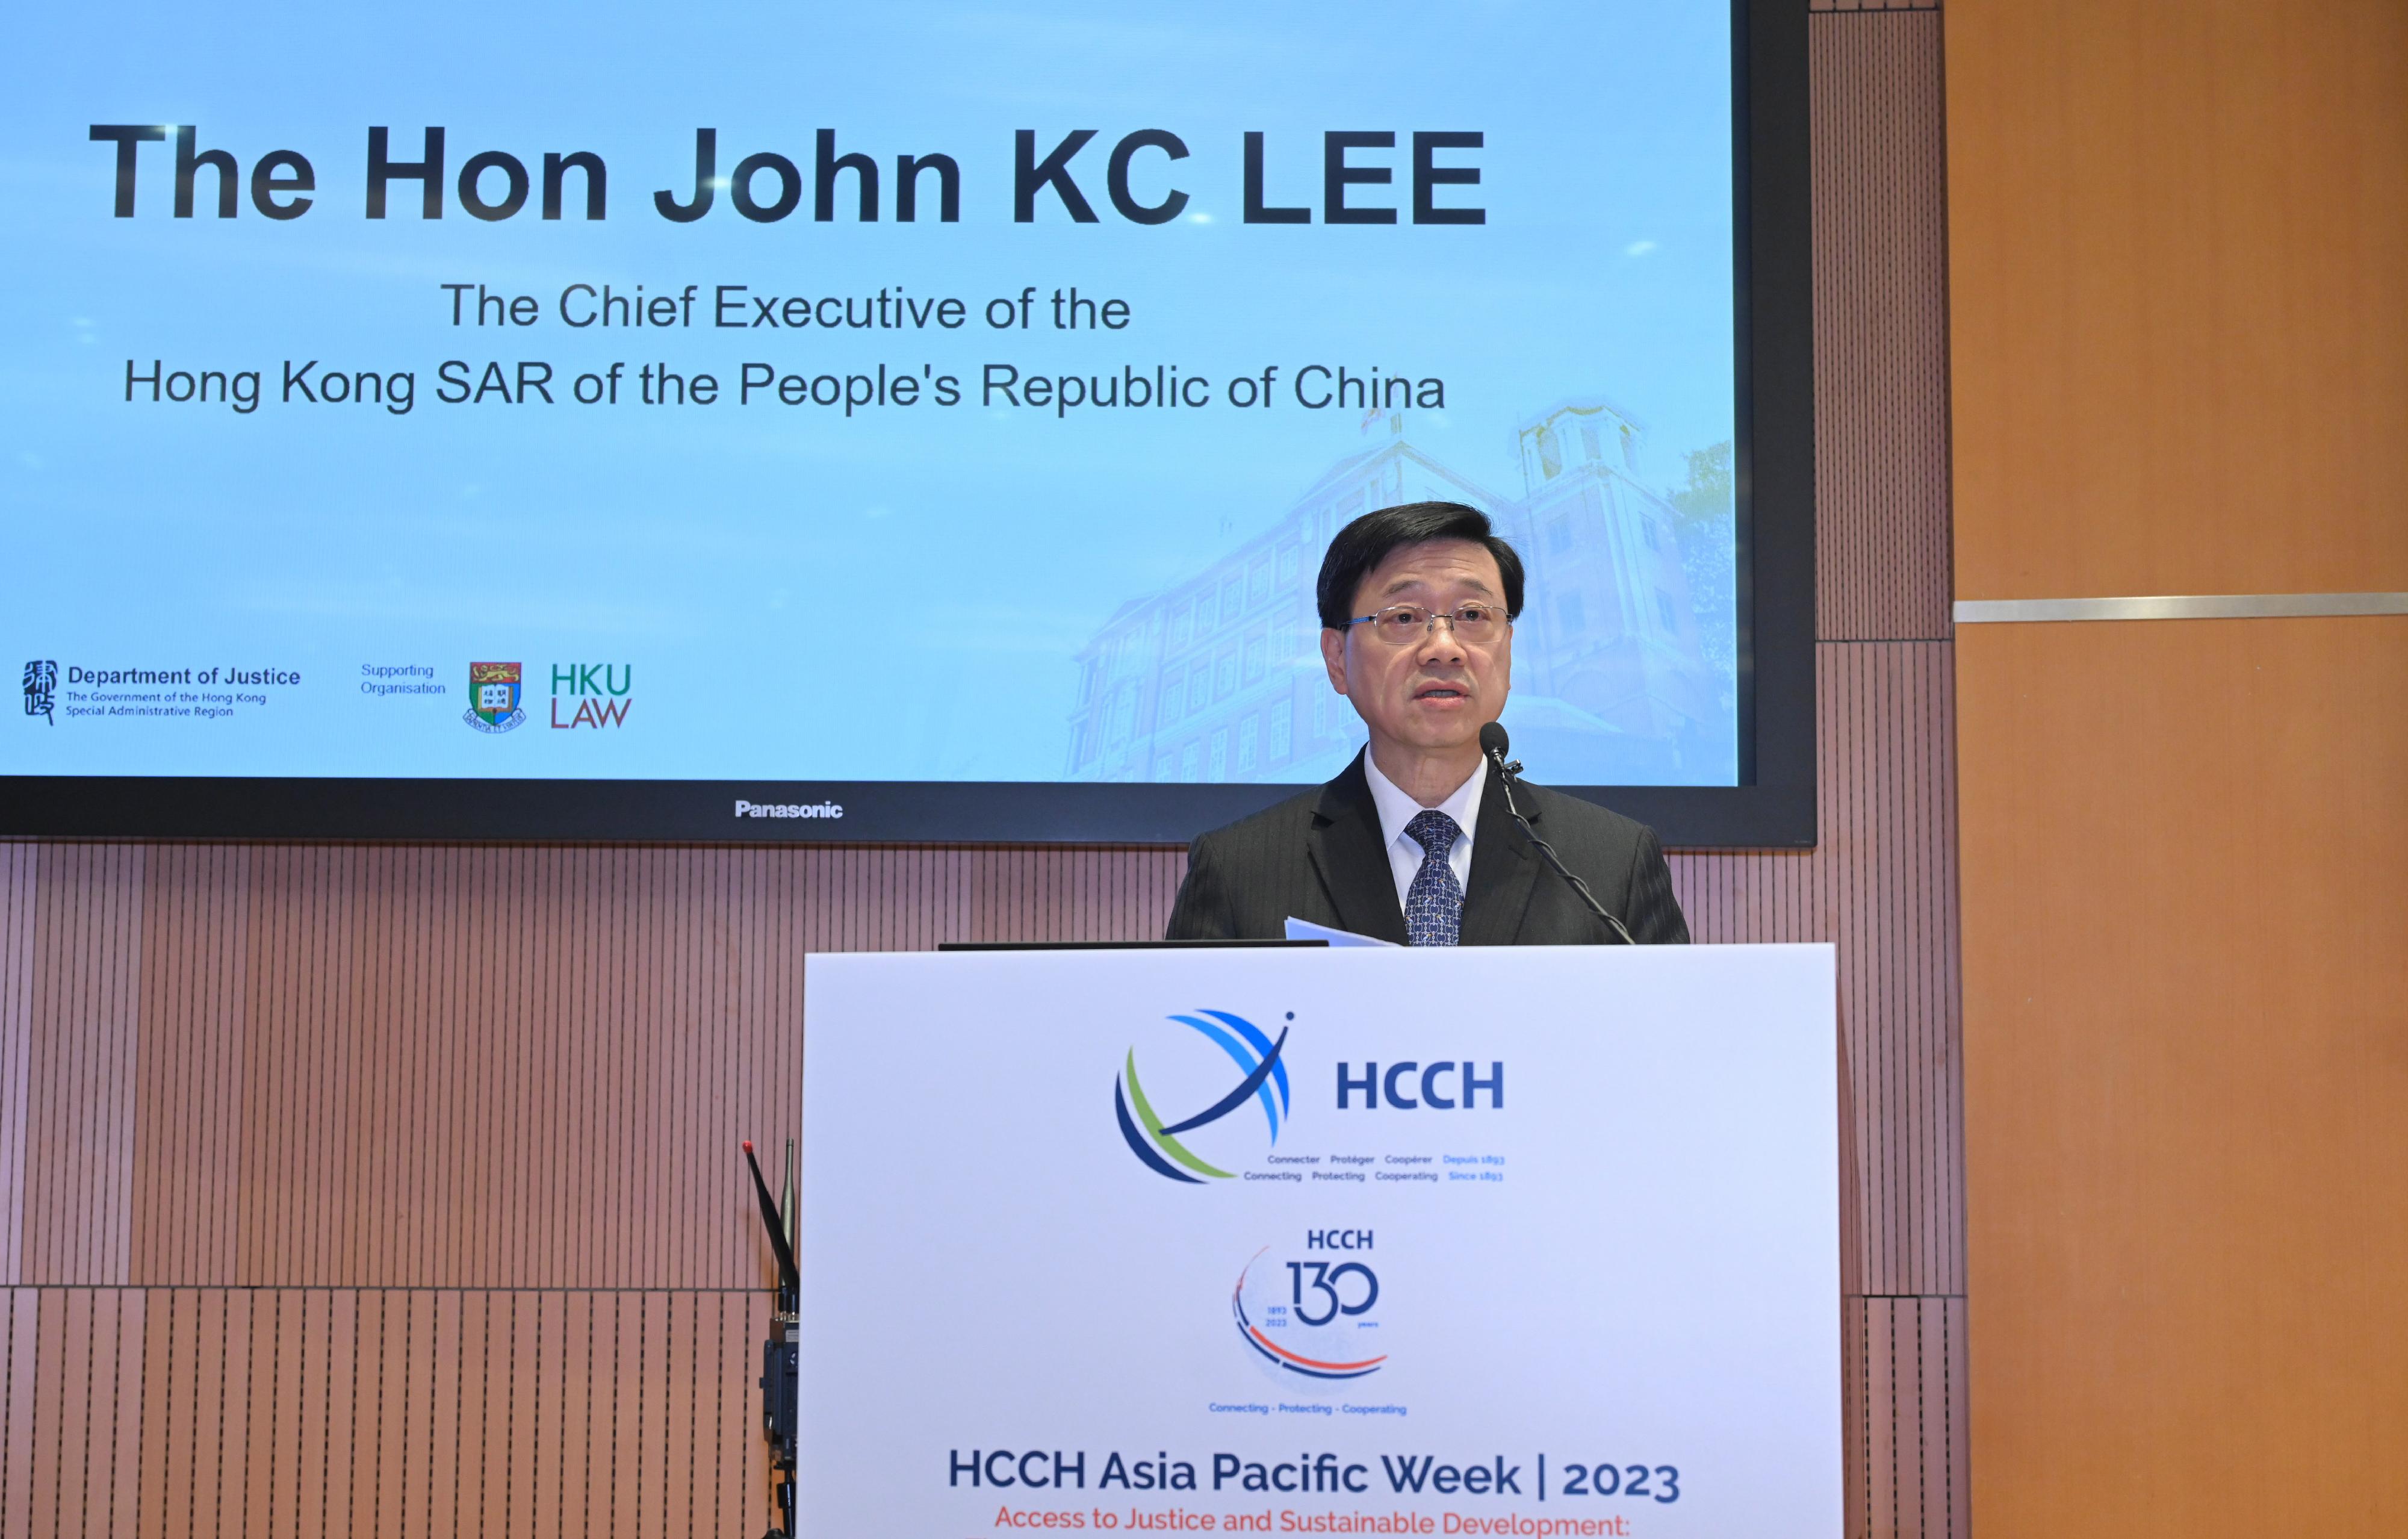 The Chief Executive, Mr John Lee, speaks at the HCCH Asia Pacific Week 2023 today (September 11).
